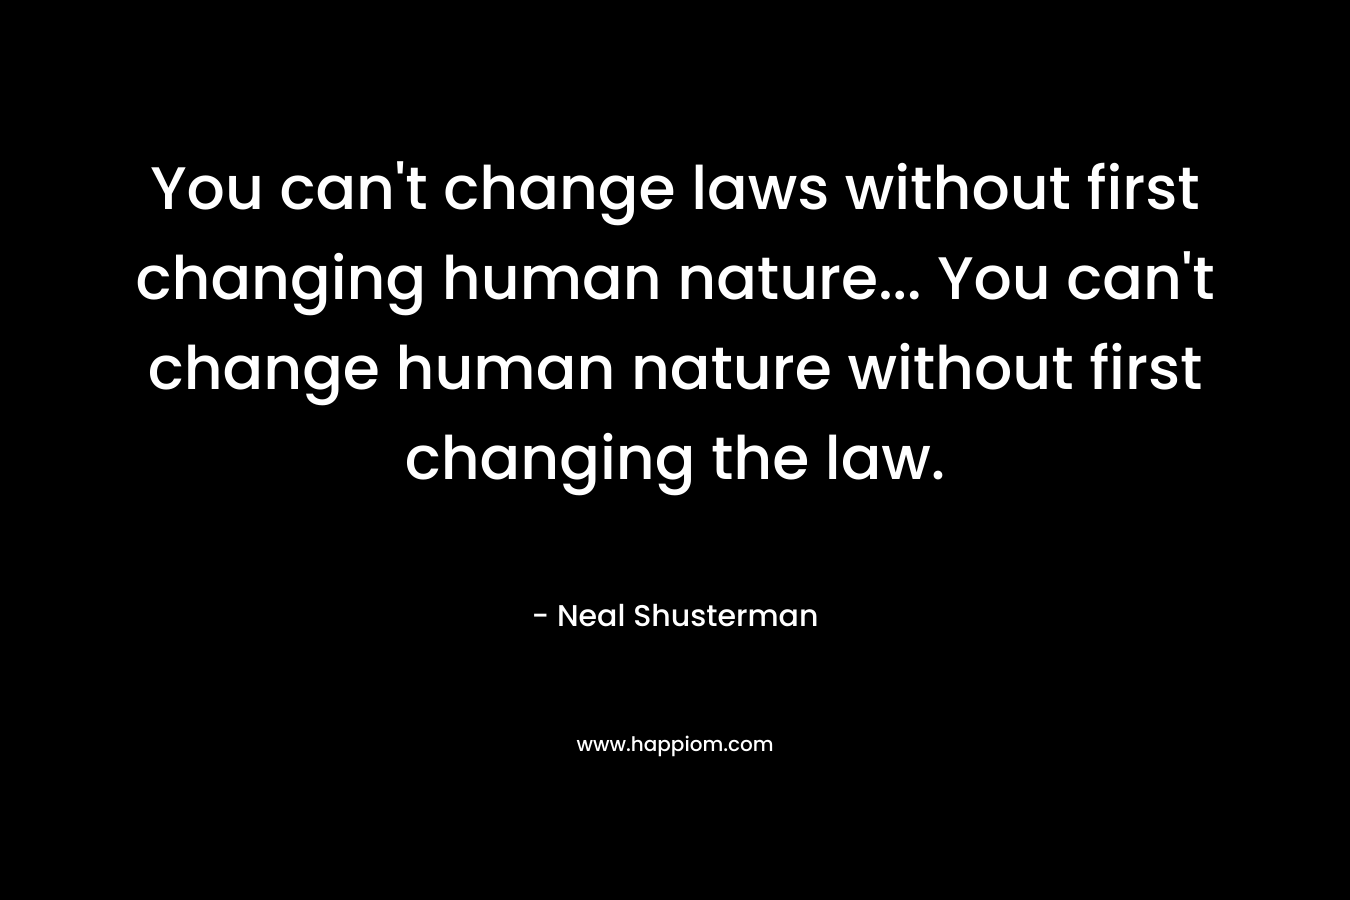 You can't change laws without first changing human nature... You can't change human nature without first changing the law.